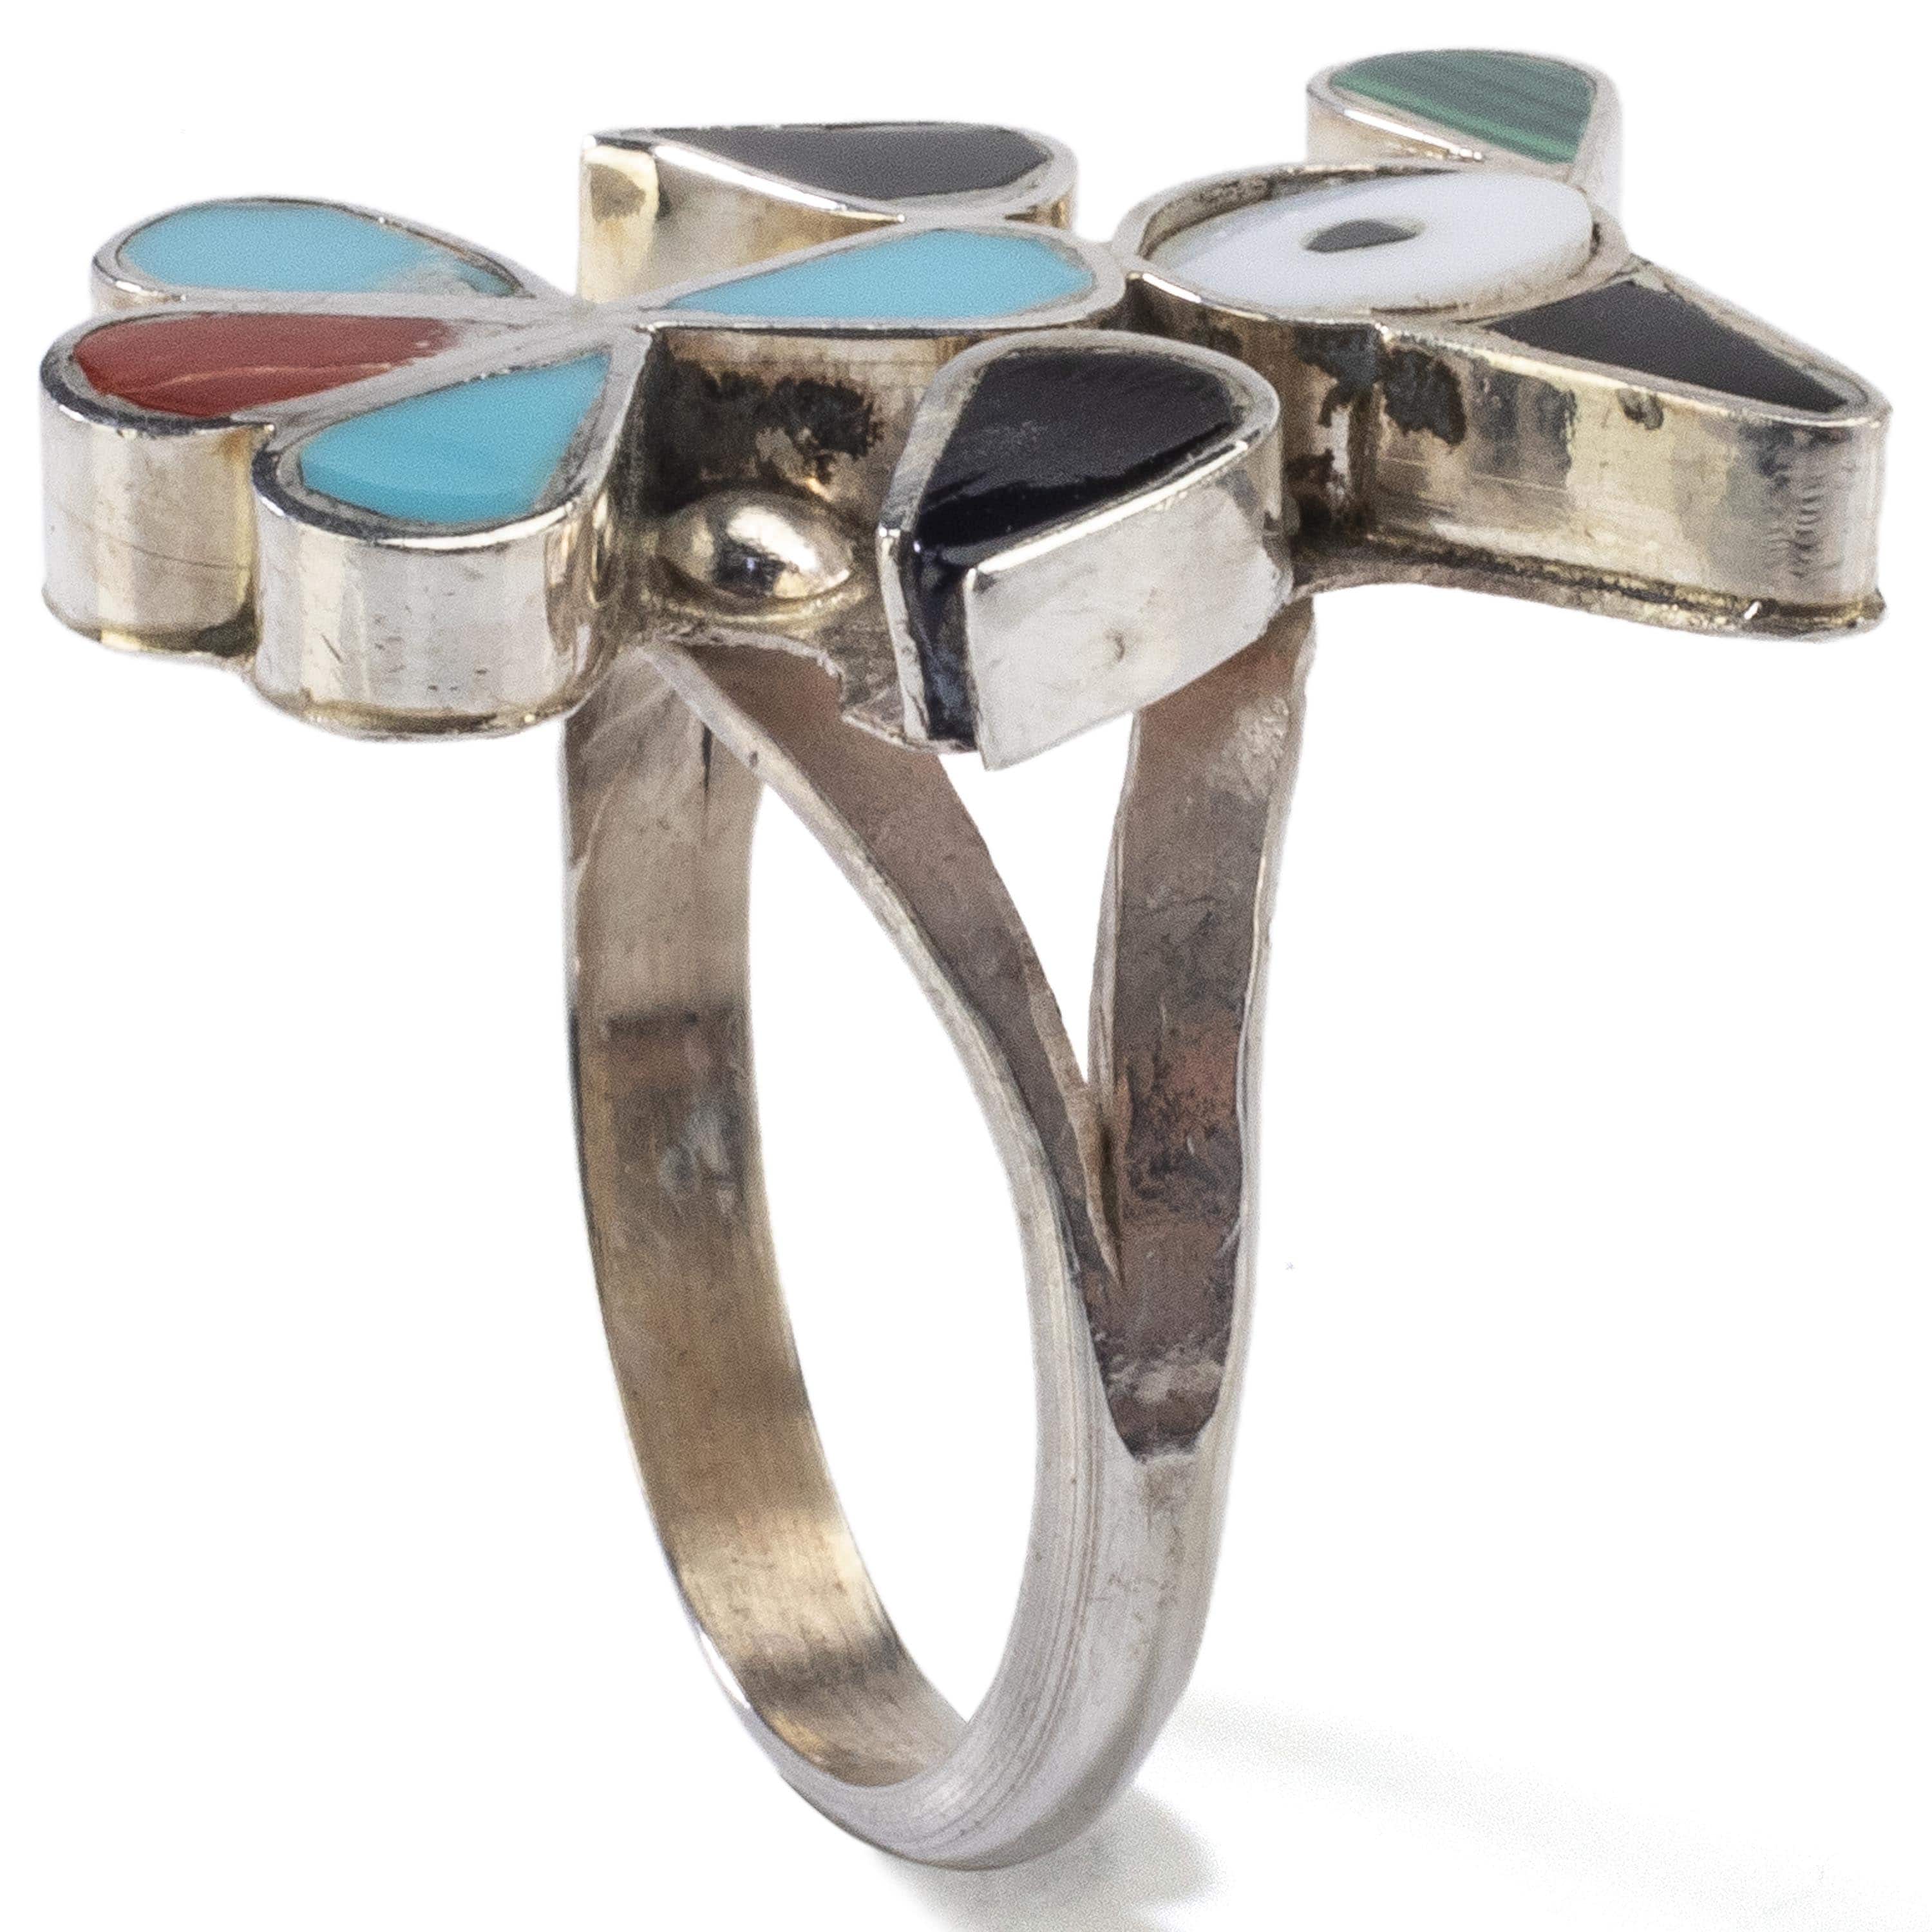 Kalifano Native American Jewelry 5.5 Pino Yunie Zuni Peyote Bird with Mother of Pearl, Black Onyx, Coral, Malachite, and Turquoise USA Native American Made 925 Sterling Silver Ring NAR200.025.55